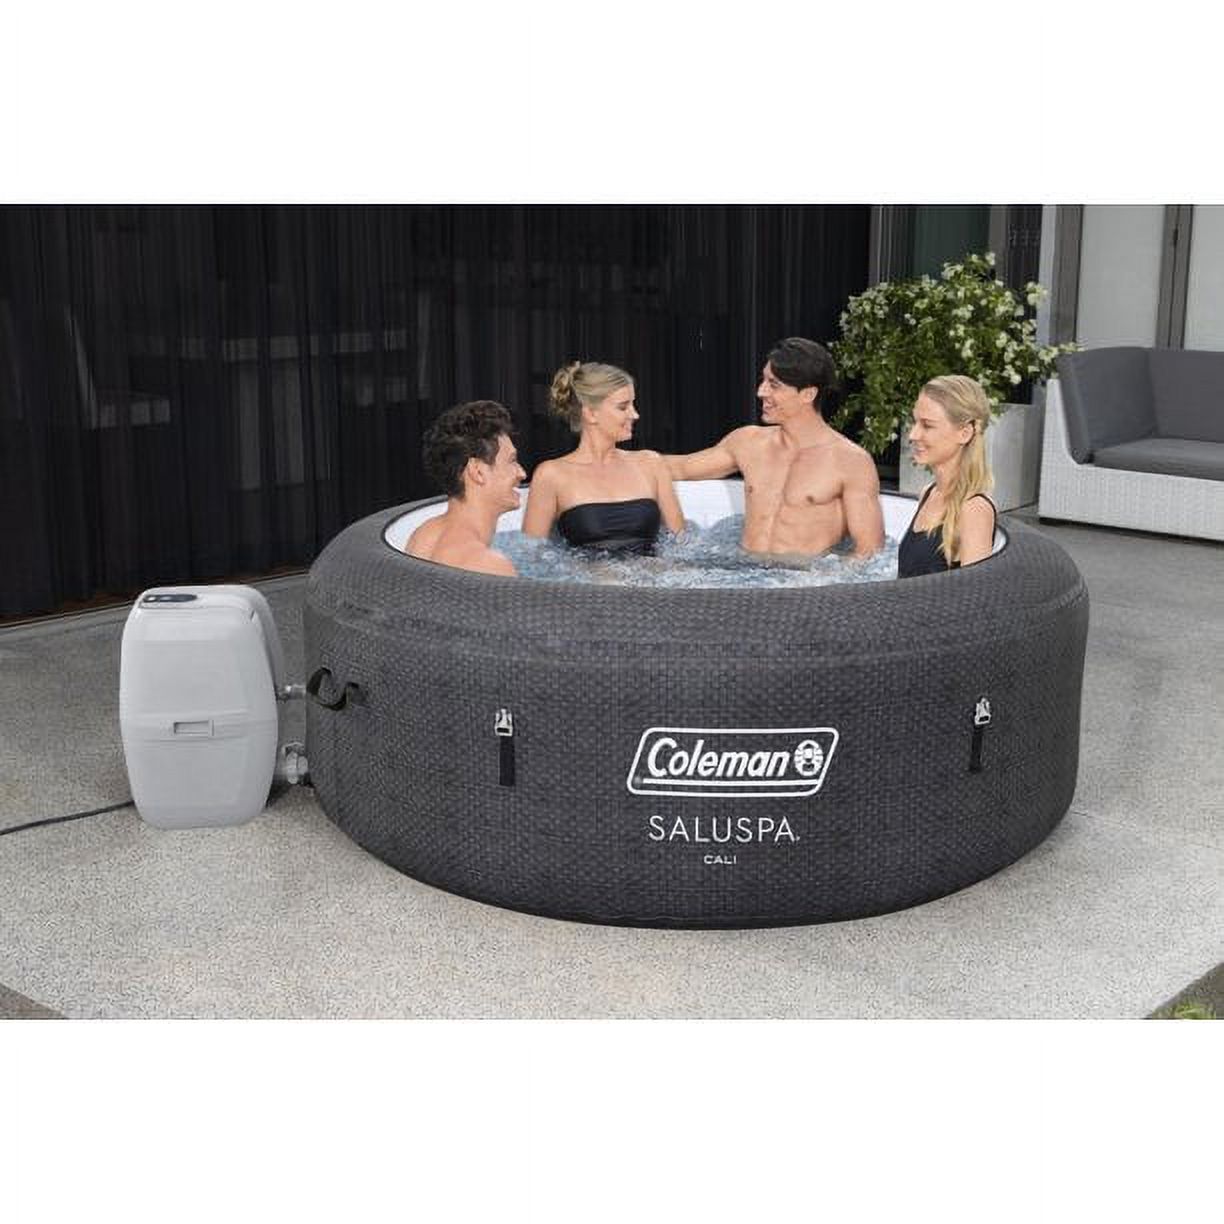 Coleman Cali Energy Sense 177 gal. Spring Inflatable Hot Tub Spa 2-4 Person, 104˚F - image 3 of 8